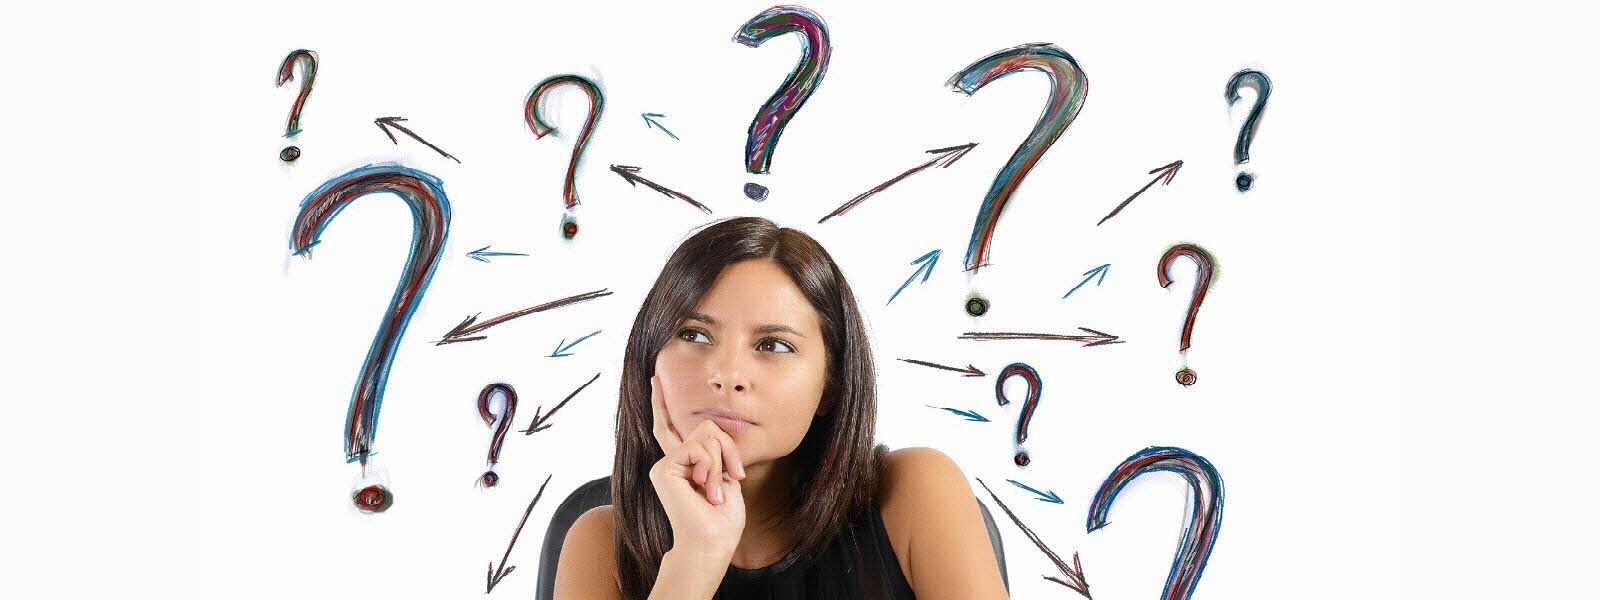 3 Questions Every Vendor Needs to Ask their PRM Provider